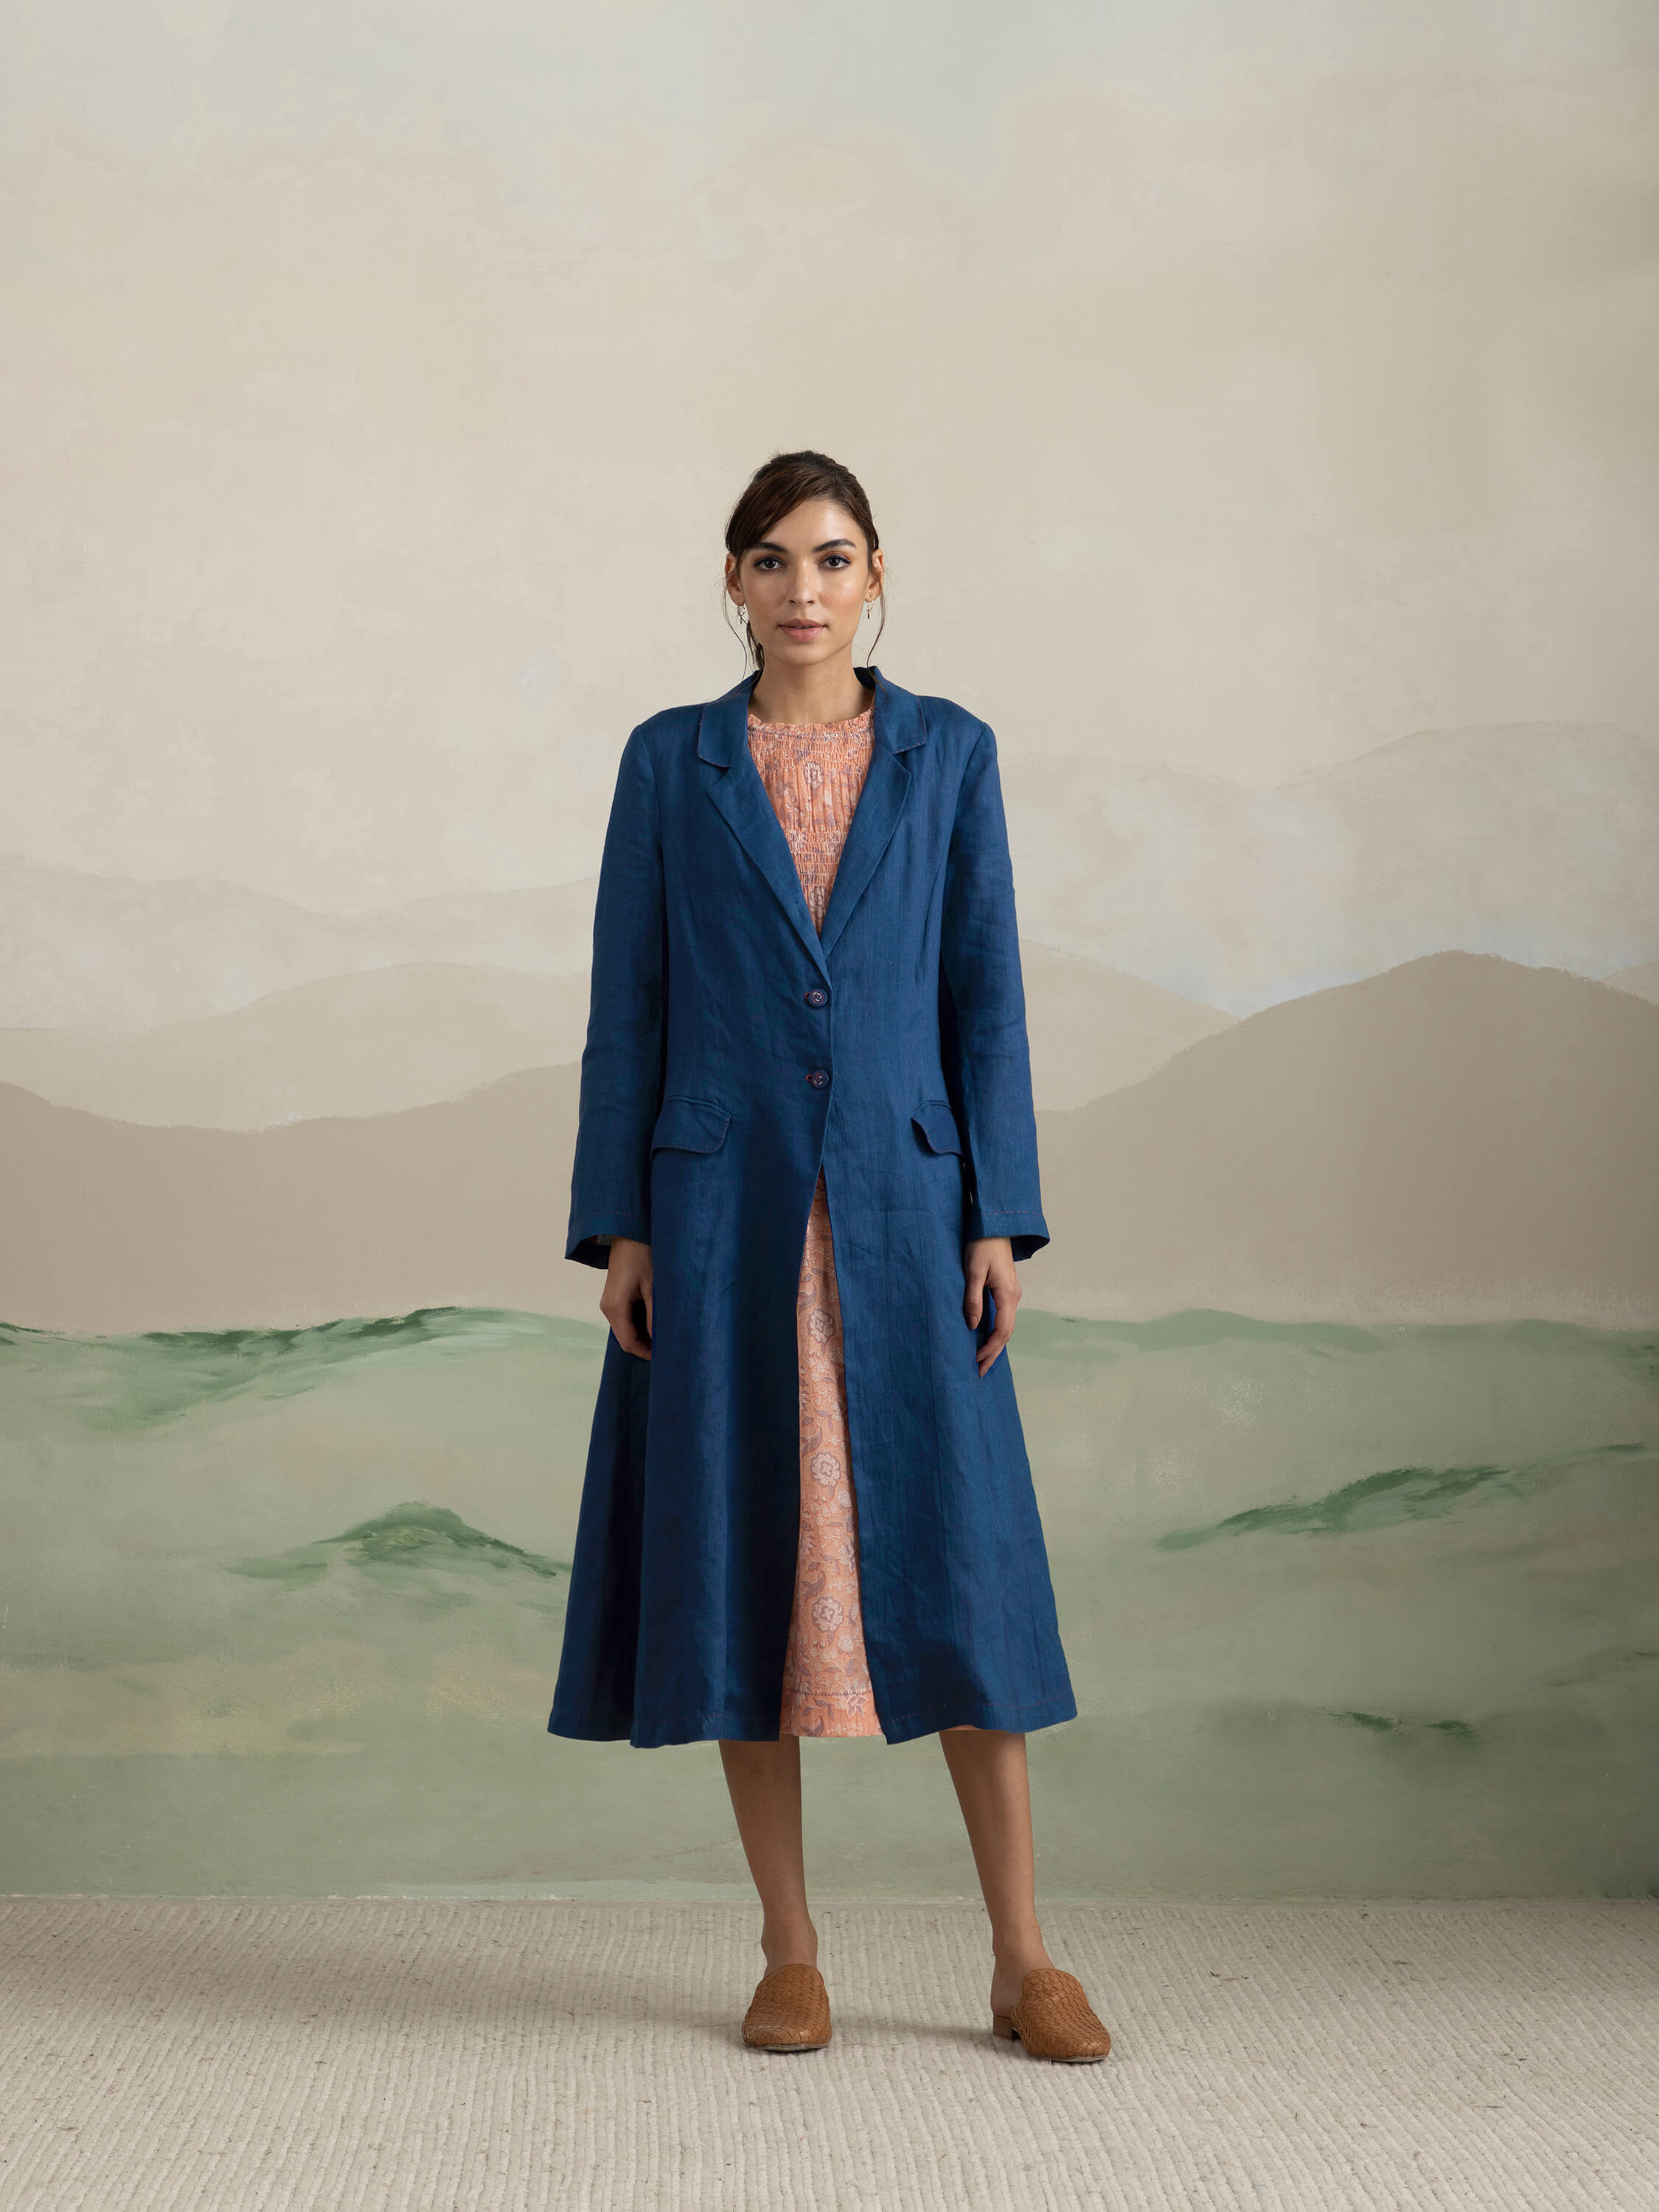 Woman in a blue coat and pink dress, minimalist background.